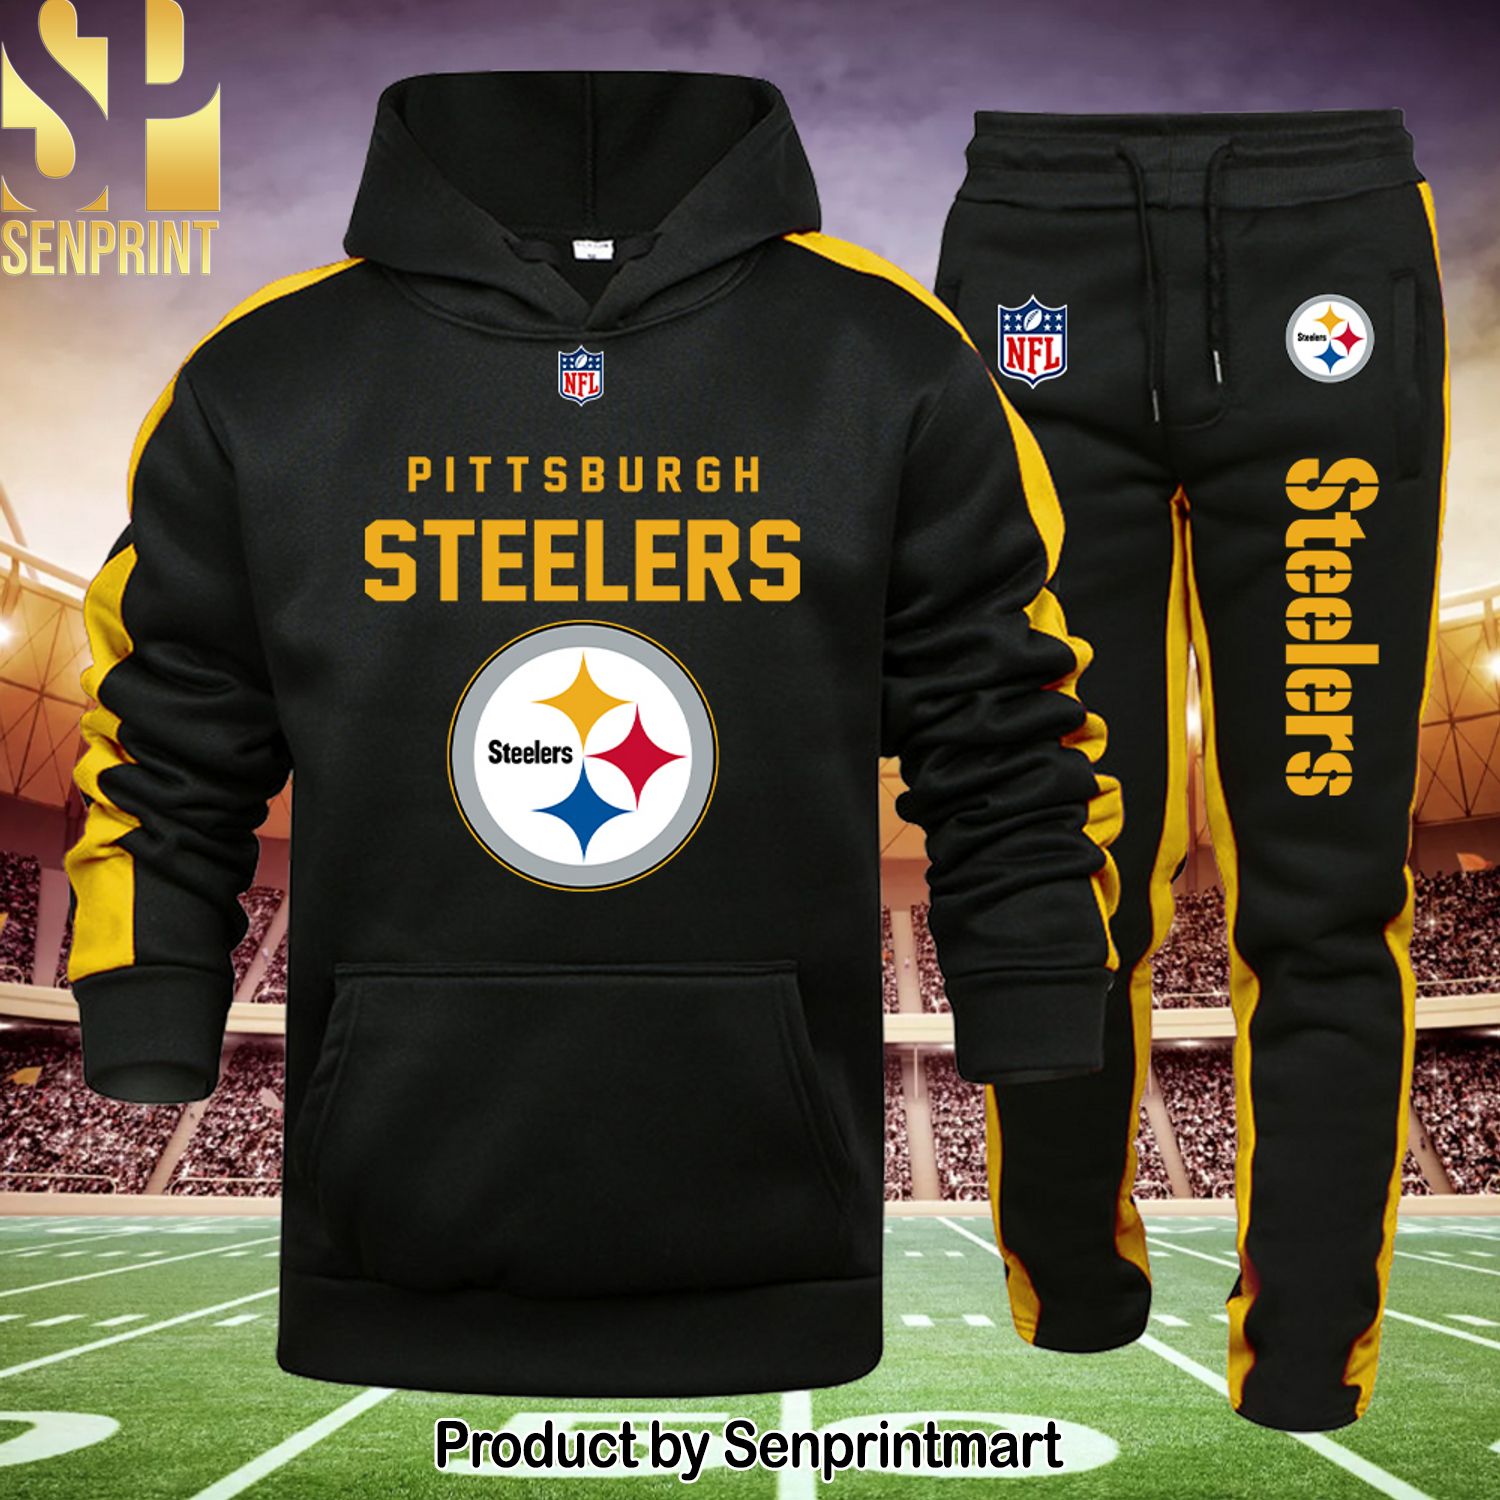 NFL Pittsburgh Steelers 3D All Over Print Shirt and Sweatpants